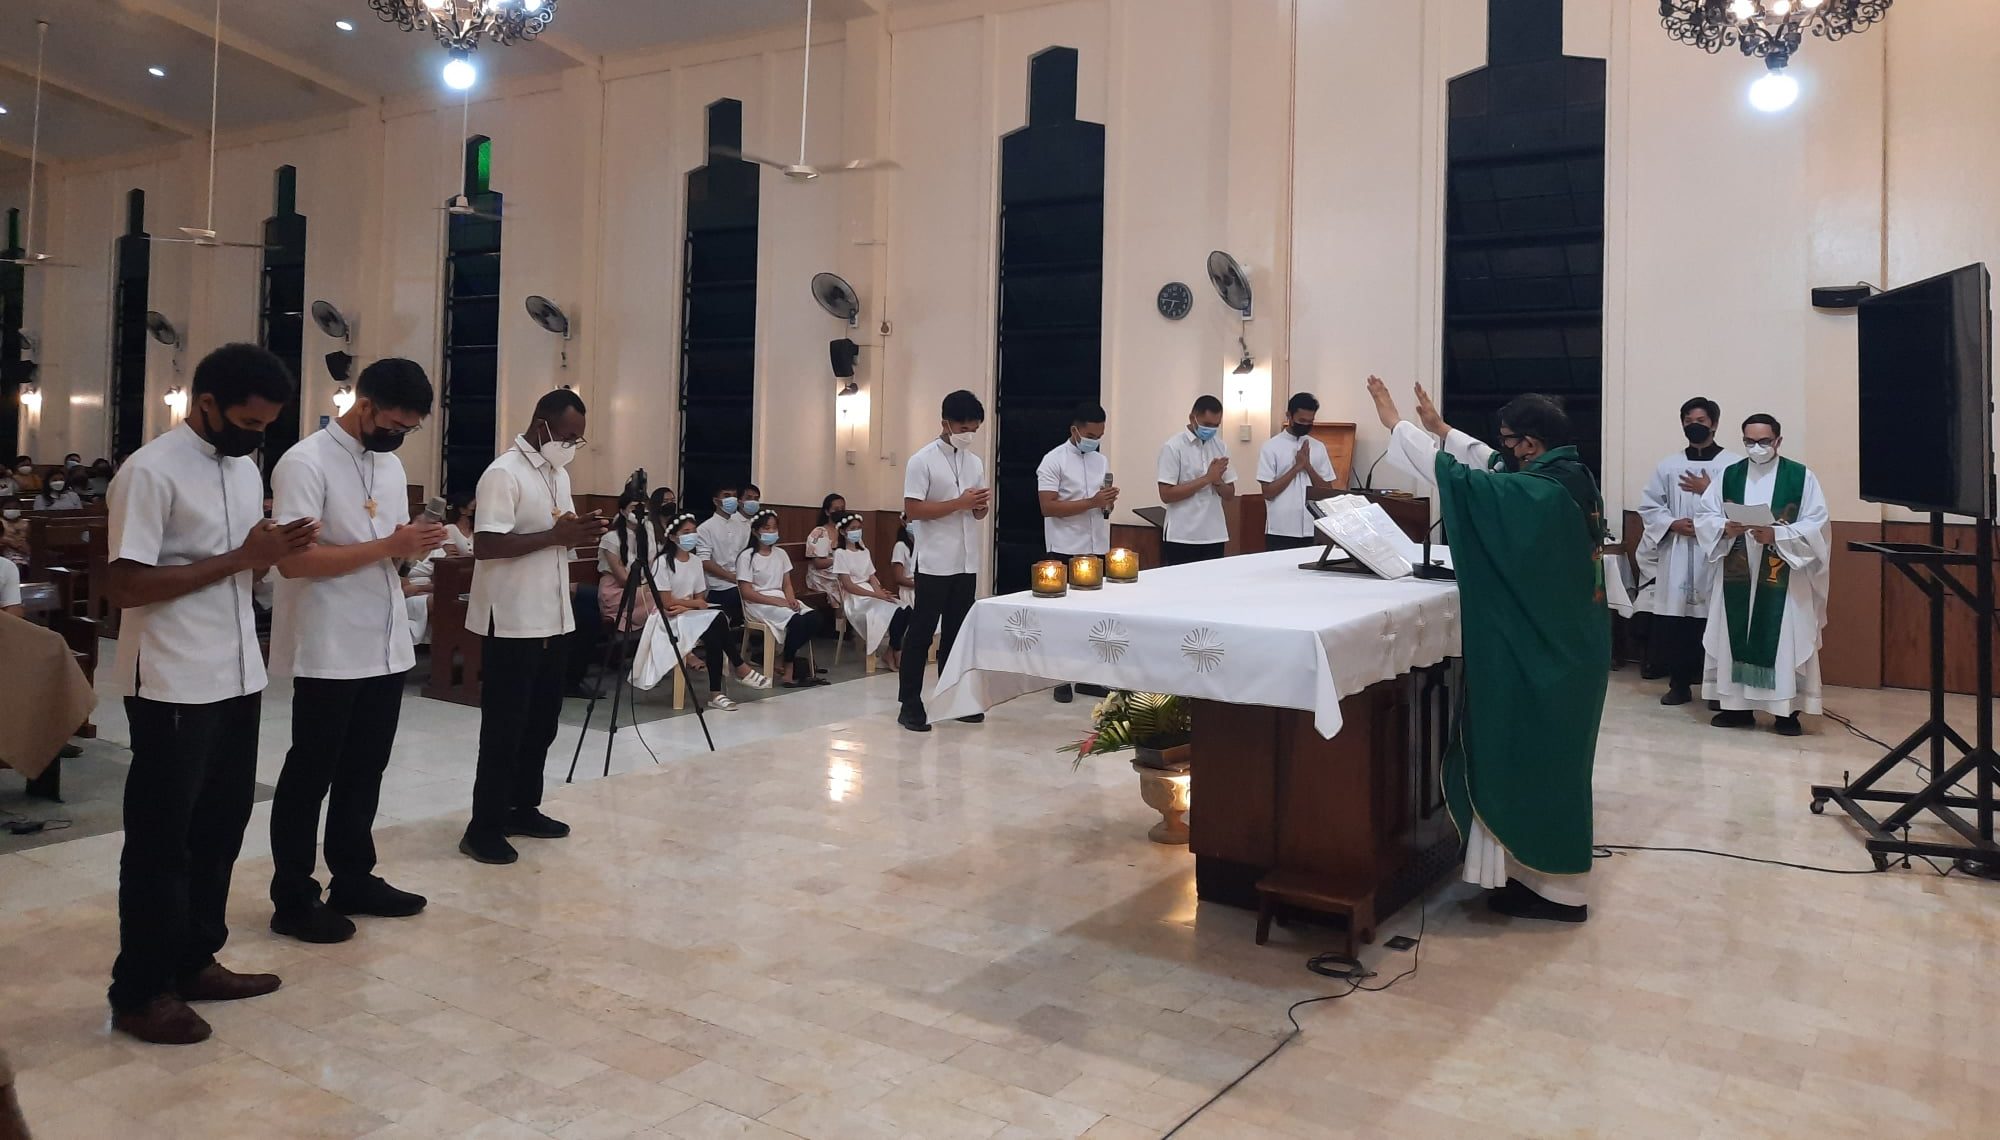 Commissioning of Extraordinary Ministers of Holy Communion